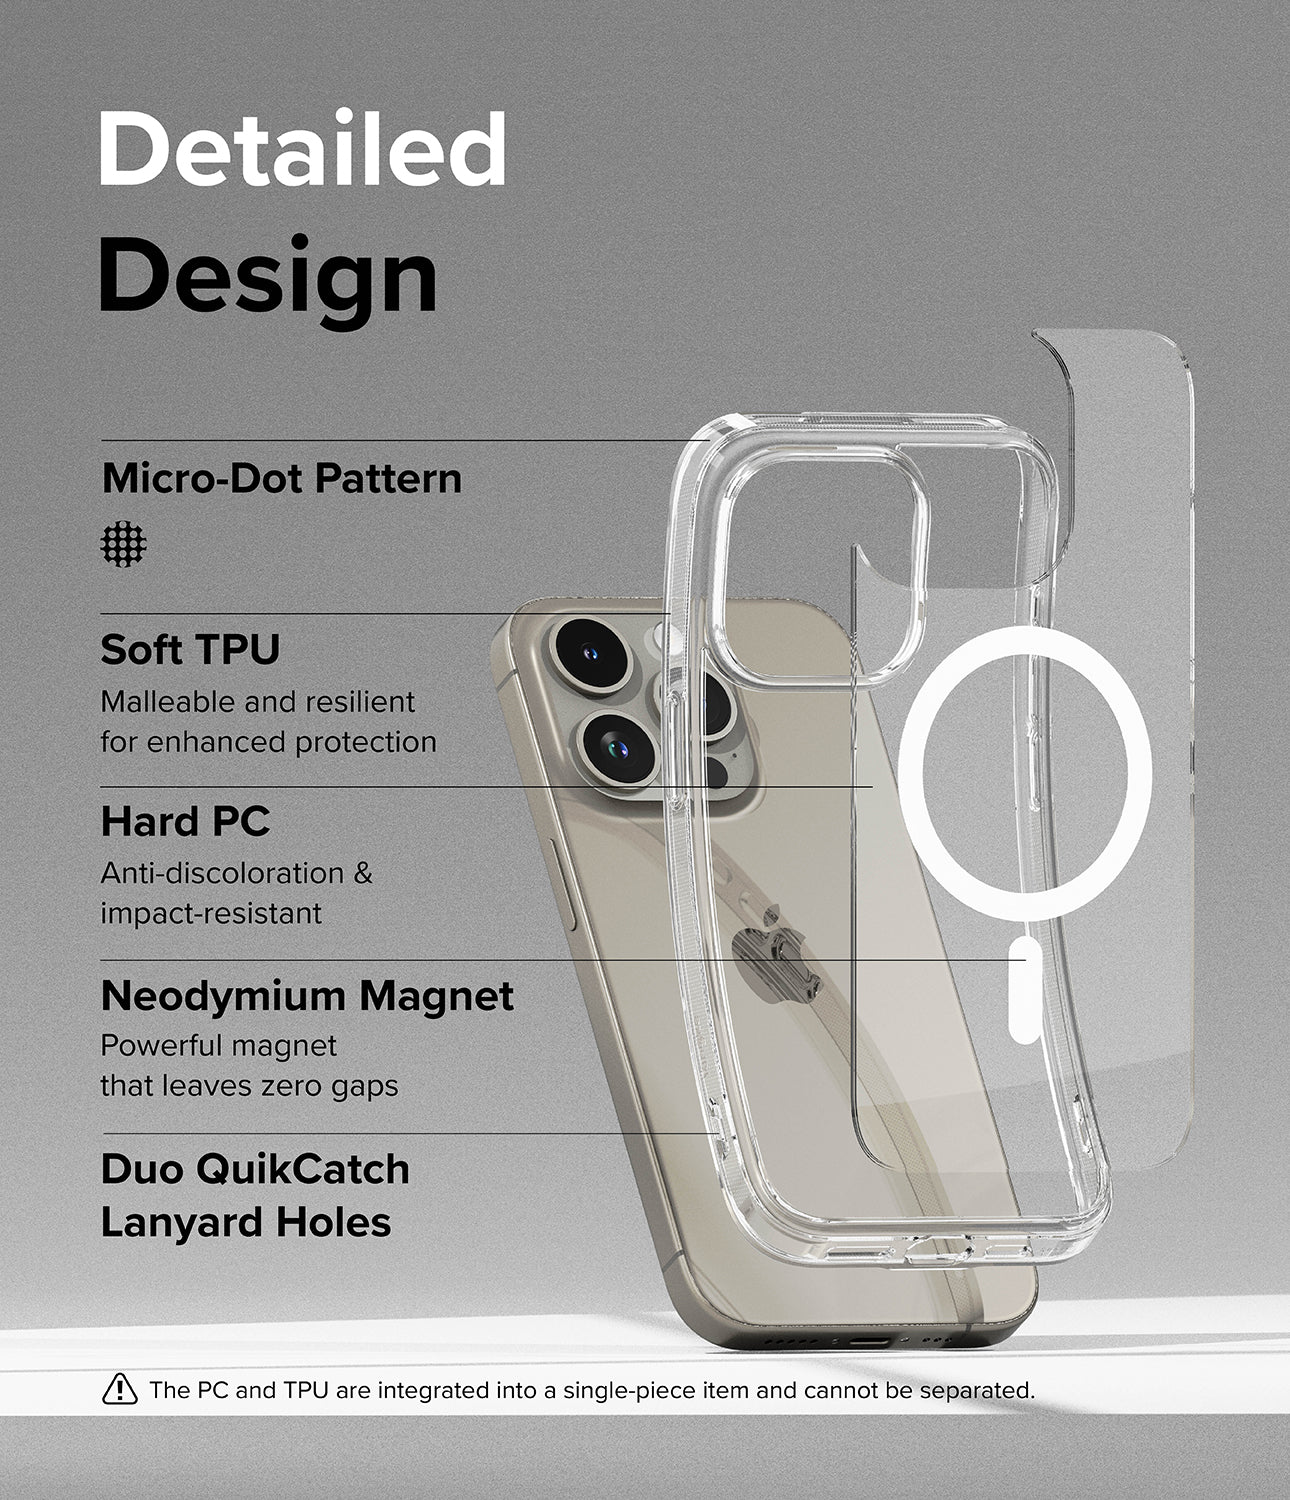 iPhone 15 Pro Max Case | Fusion Magnetic - Clear - Detailed Design. Micro-Dot Pattern. Malleable and resilient for enhanced protection with Soft TPU. Powerful magnet that leaves zero gaps with neodymium magnet. Duo QuikCatch Lanyard Holes.